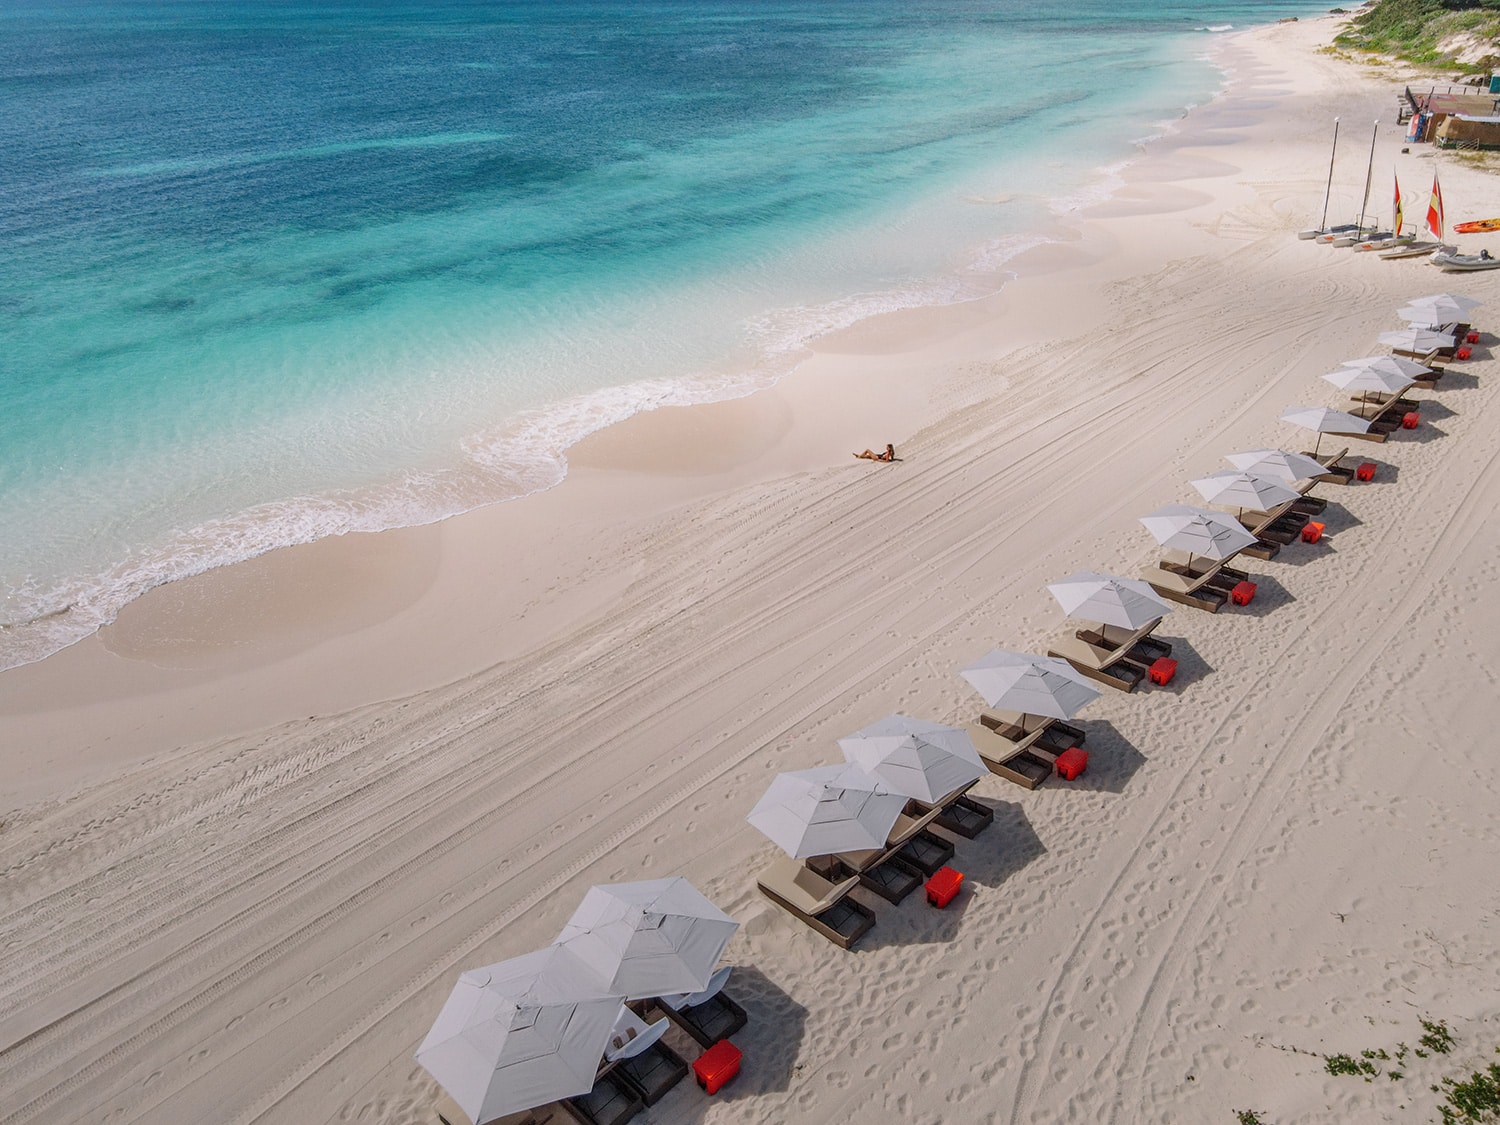 The spectacular stretch of beach located at Aurora Anguilla Golf Resort and Spa.